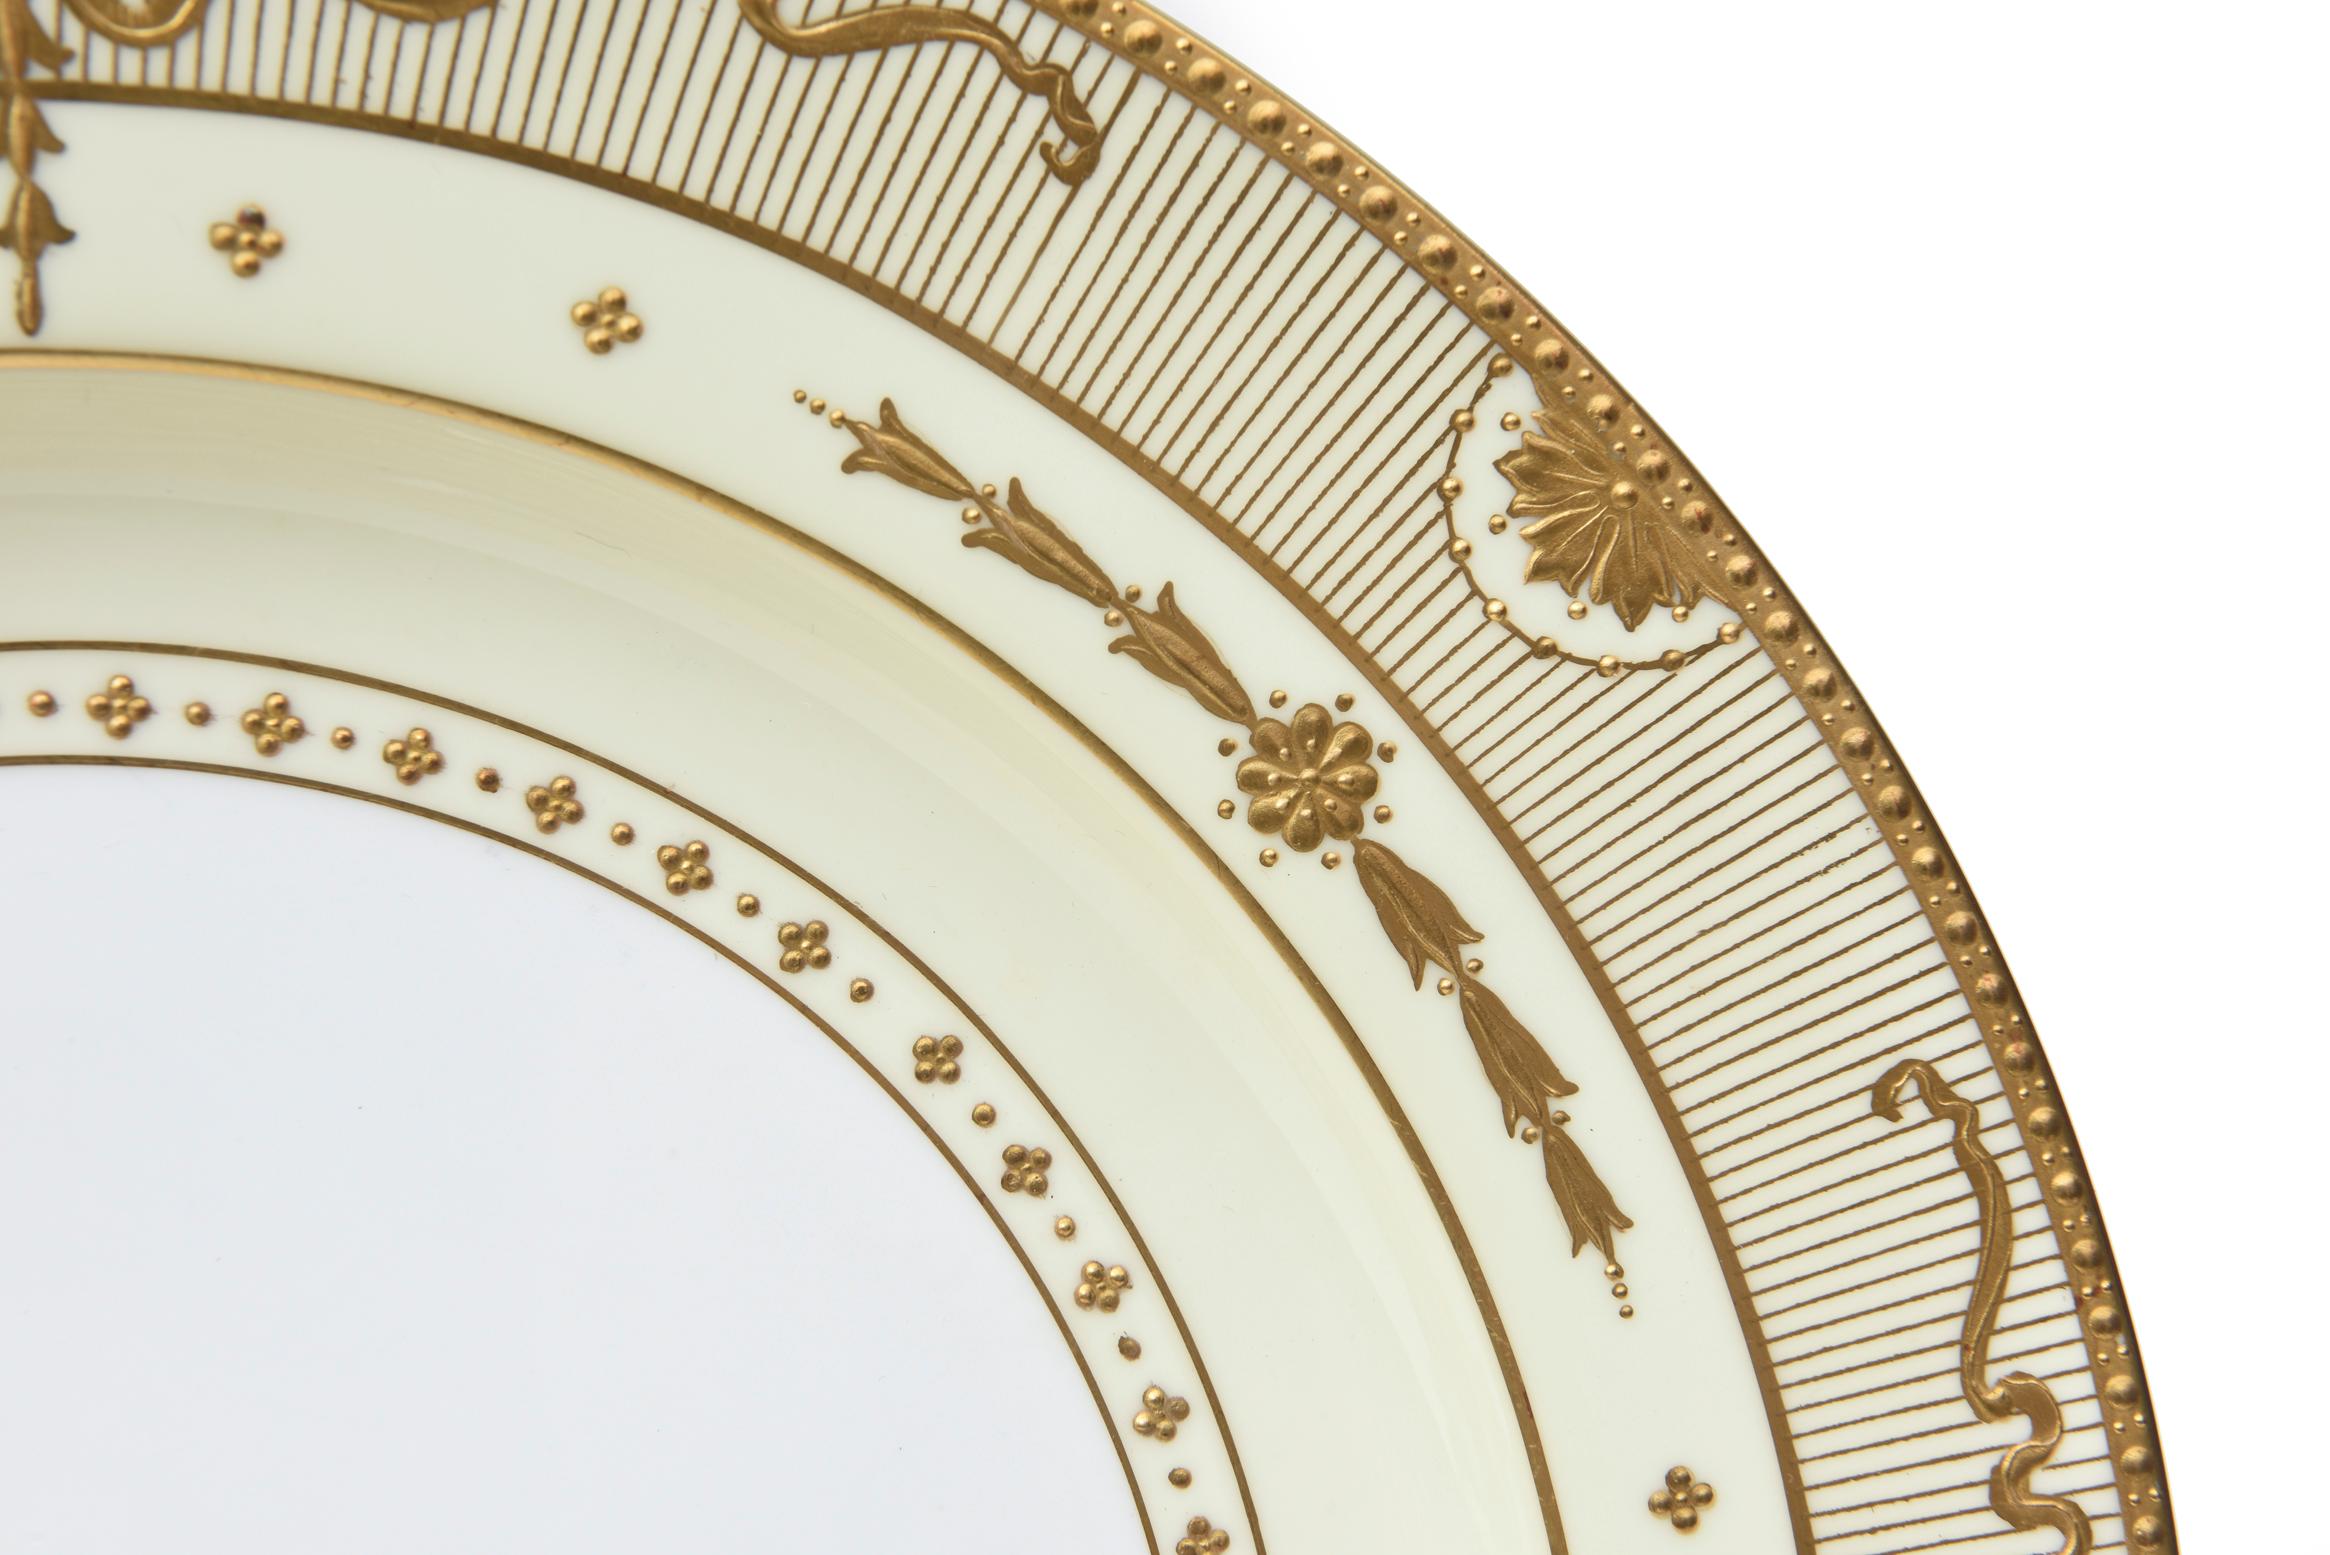 Greco Roman 12 Pate Sur Pate Dinner Plates by Minton, England, Medallion Cartouches A. Birks